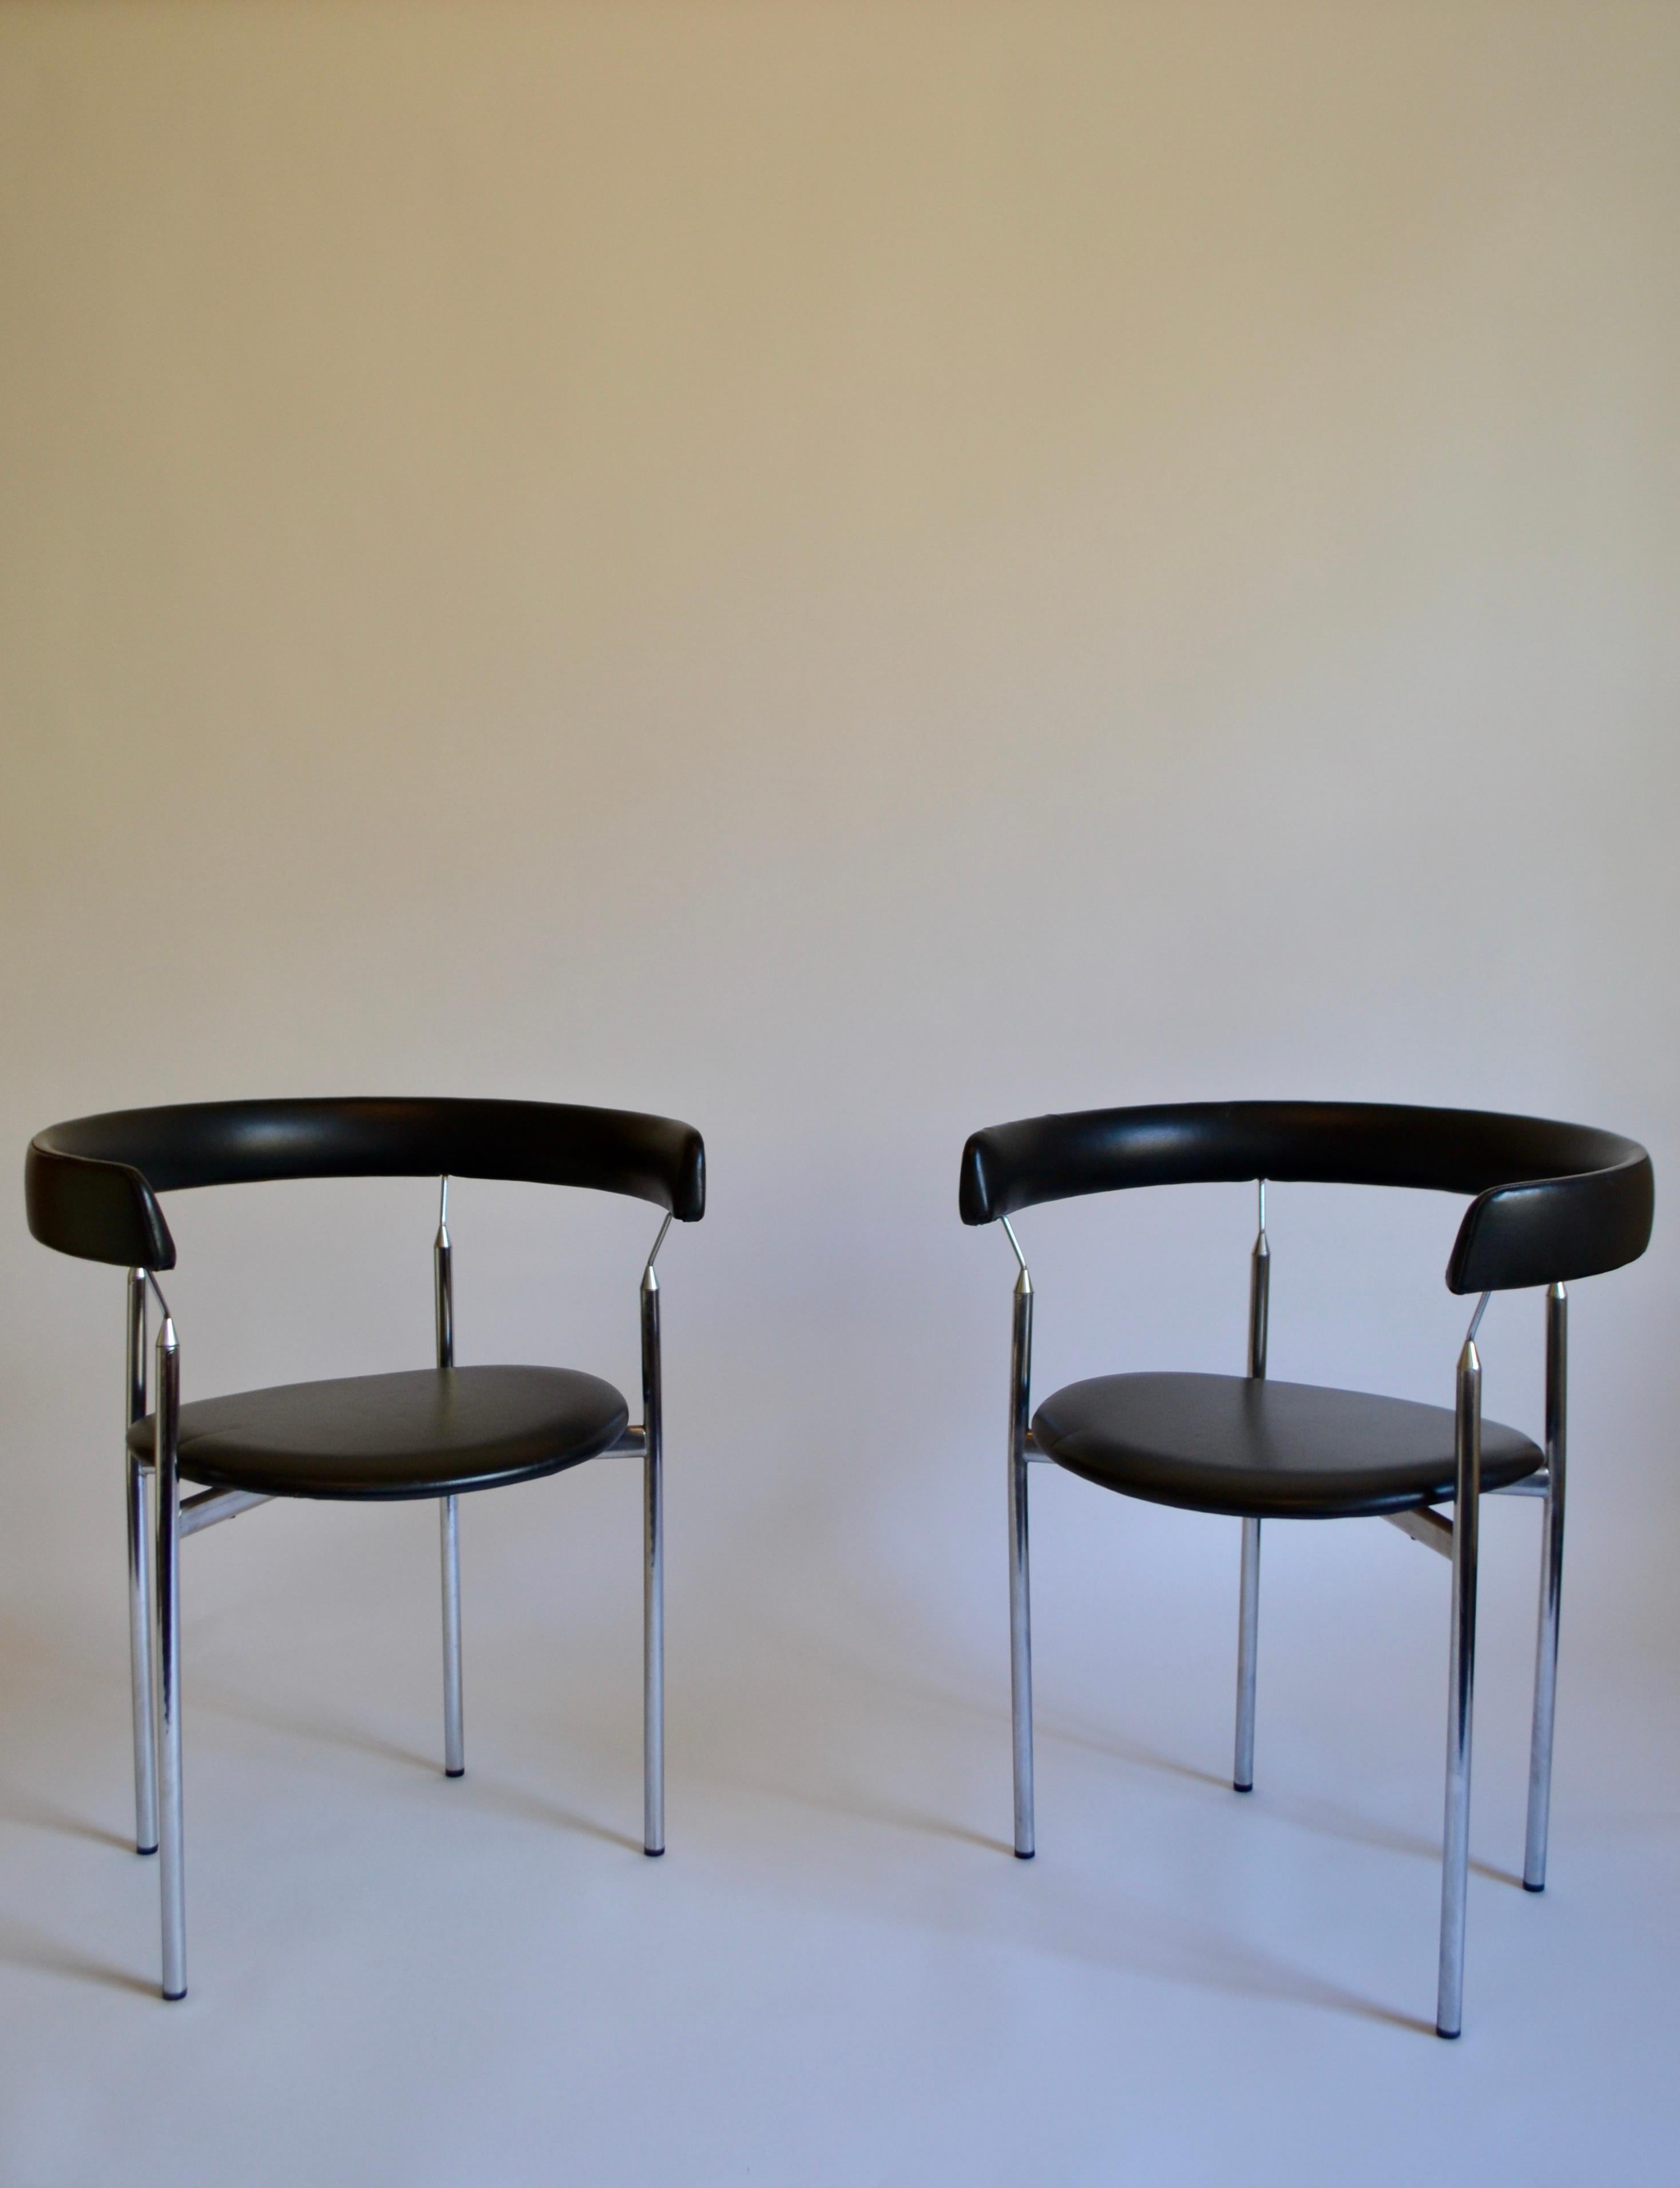 Pair of Rondo chairs designed by Jan Lunde Knudsen for Karl Sørlie Sarpsborg Fabrikker in Norway in the 1960s. Chrome frame with original black vinyl seating with some scuffs to vinyl. Faint makers stamp on base of one chair.